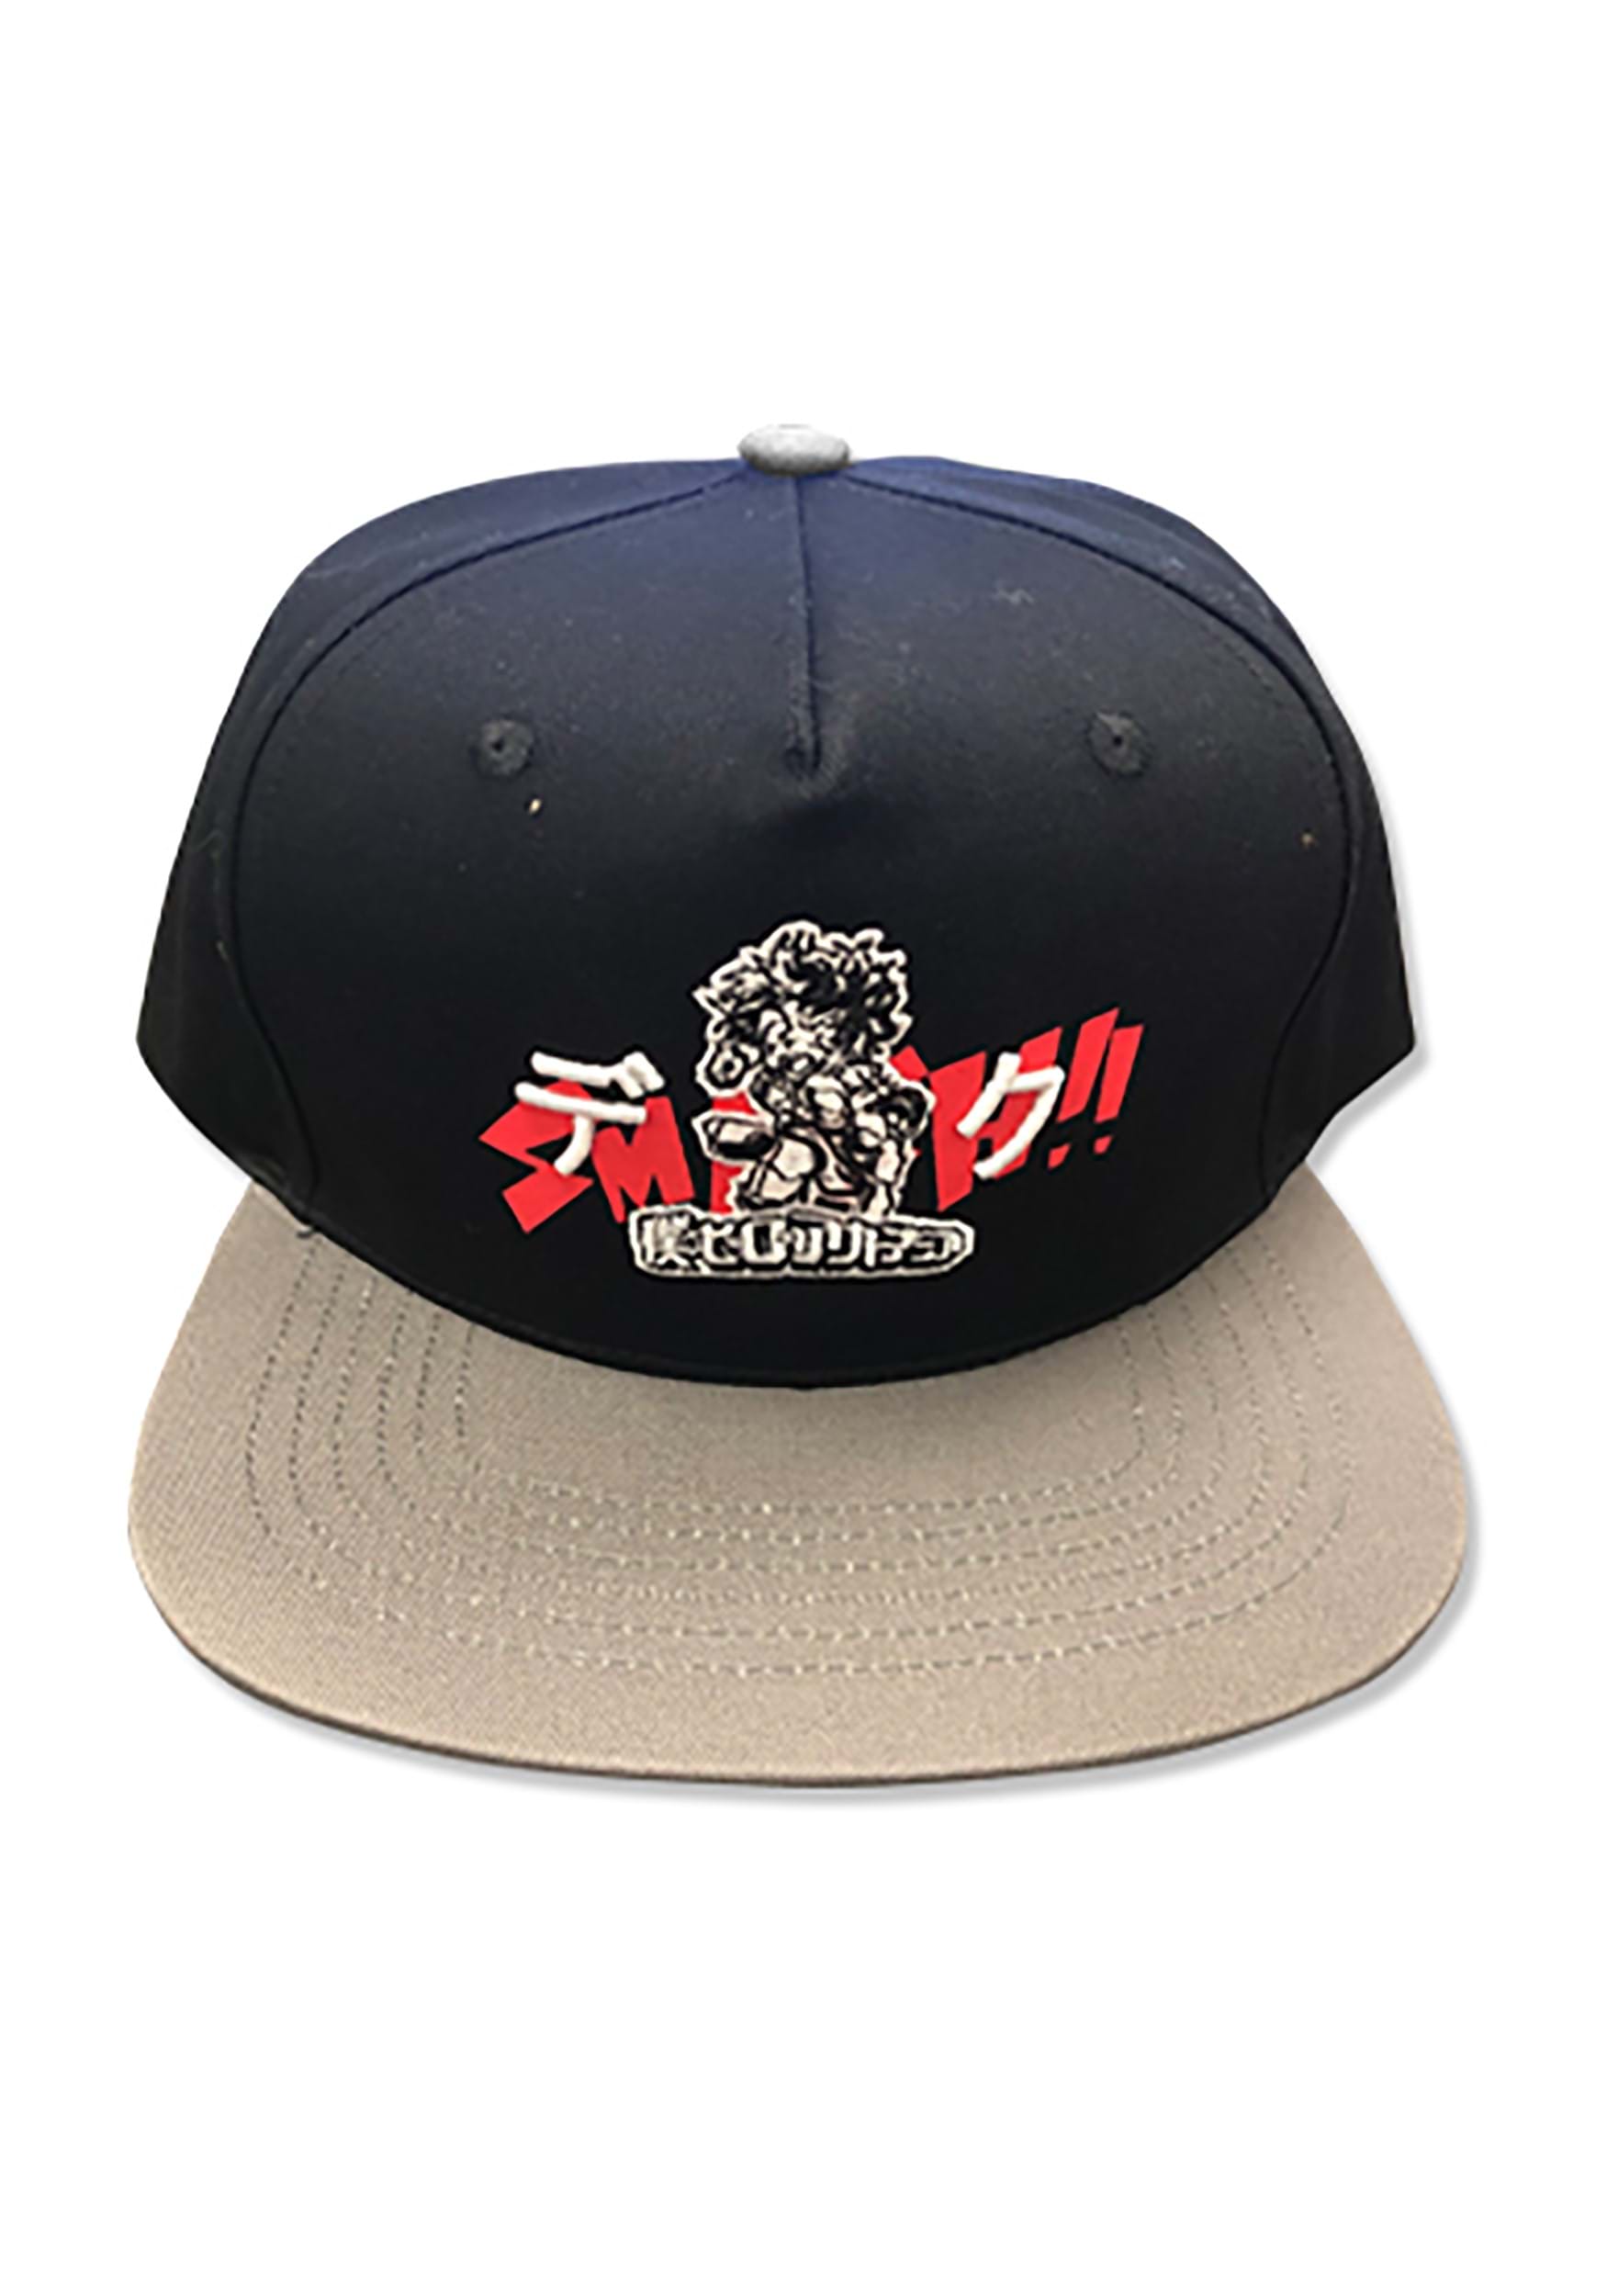 My Hero Academia- UA Adult Fitted Hat